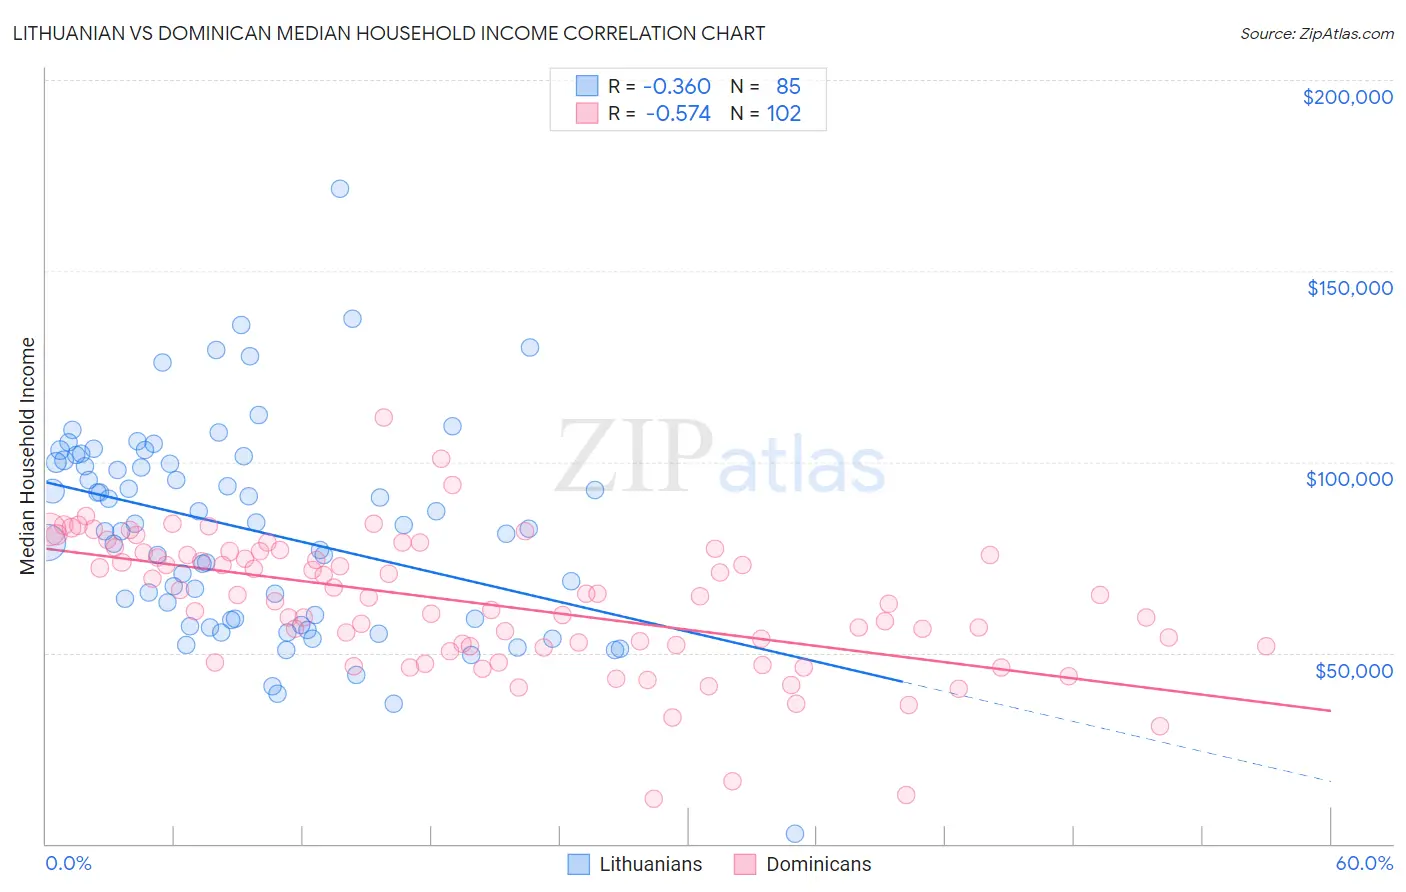 Lithuanian vs Dominican Median Household Income